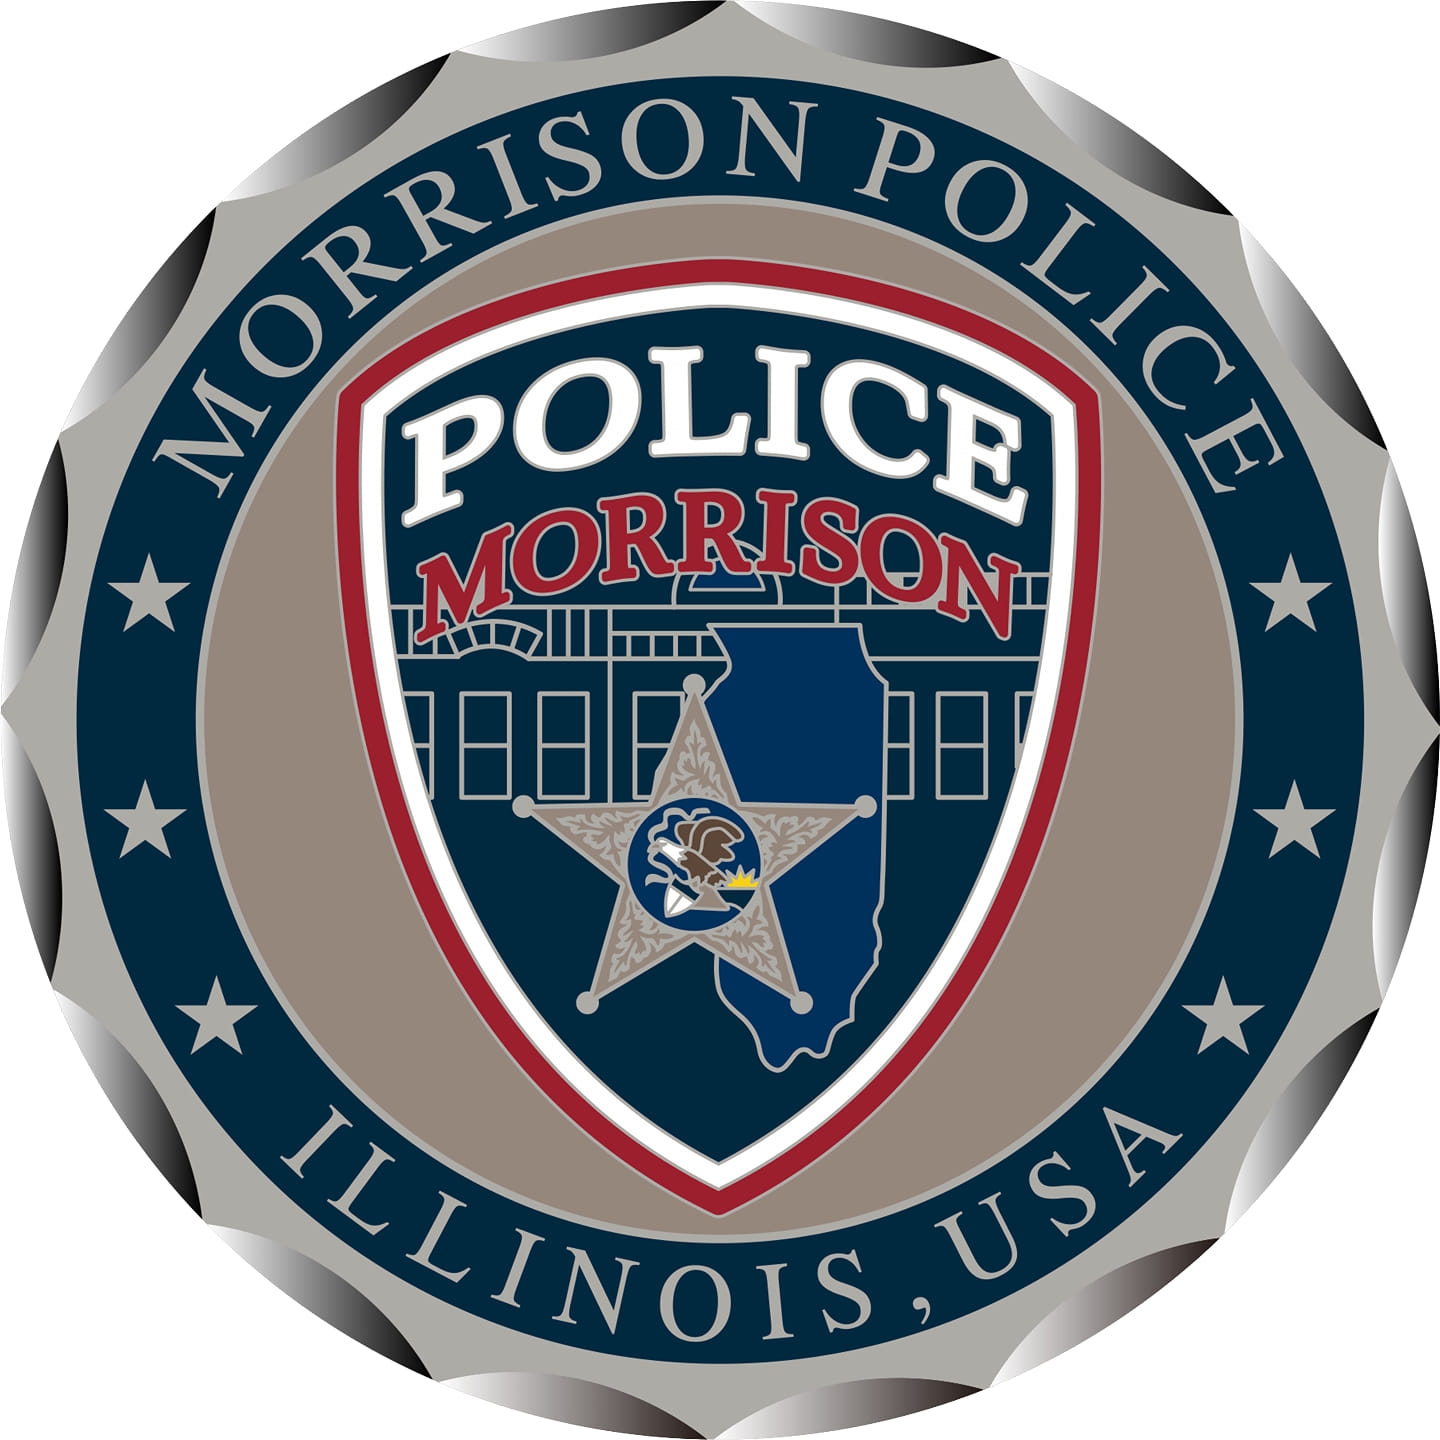 Gray and blue badge that says Police Morrison Illinois, USA